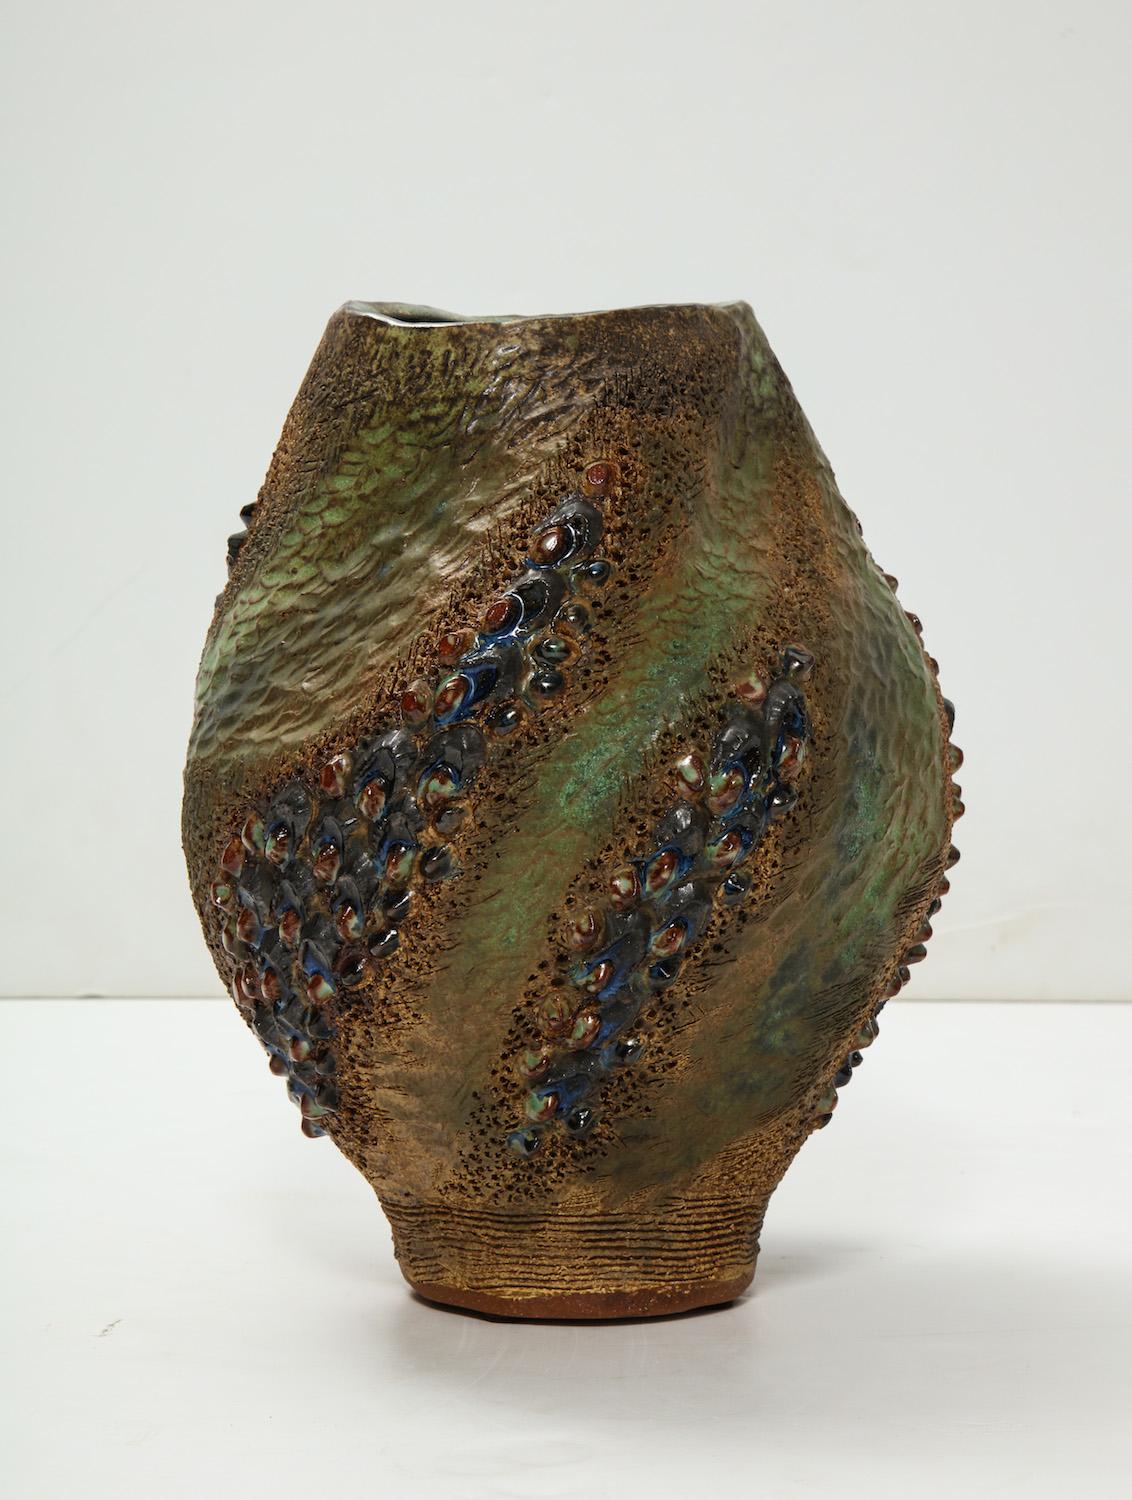 Hand-Built Ceramic Vase by Dena Zemsky In Excellent Condition For Sale In New York, NY